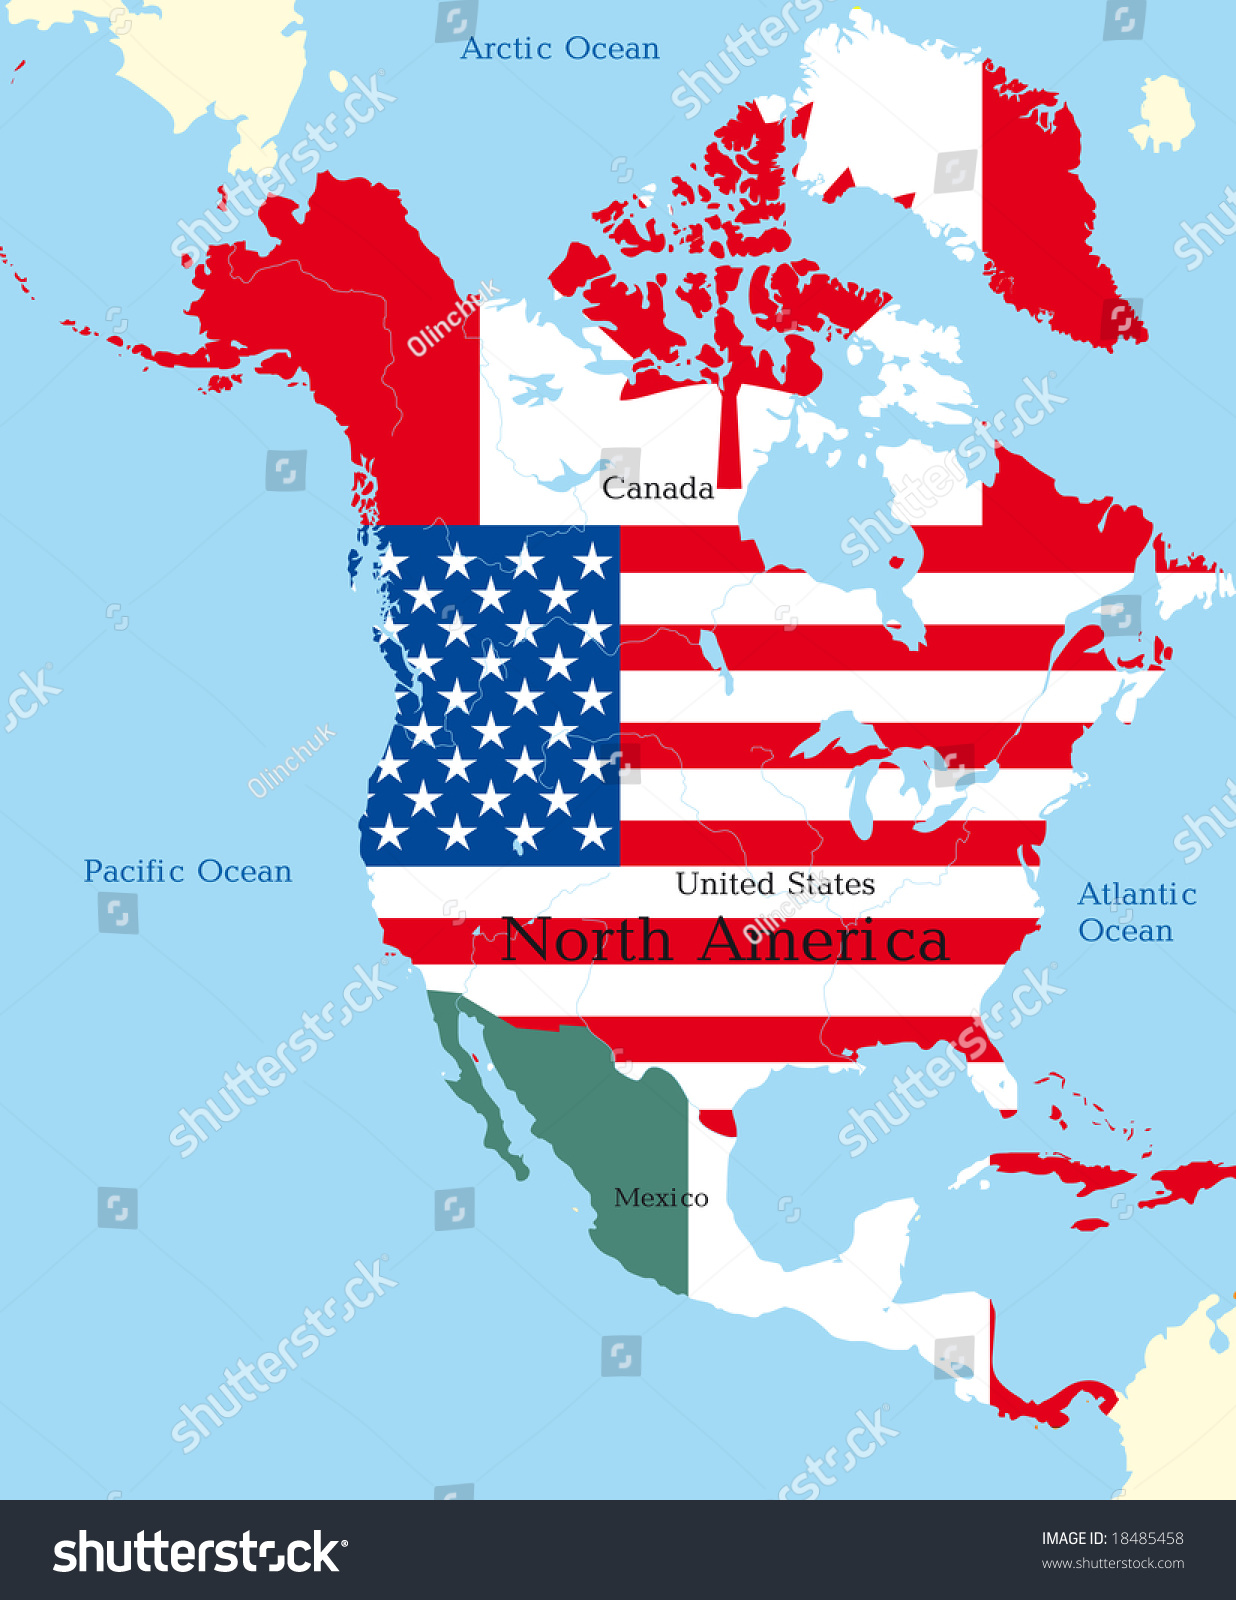 America north Difference between